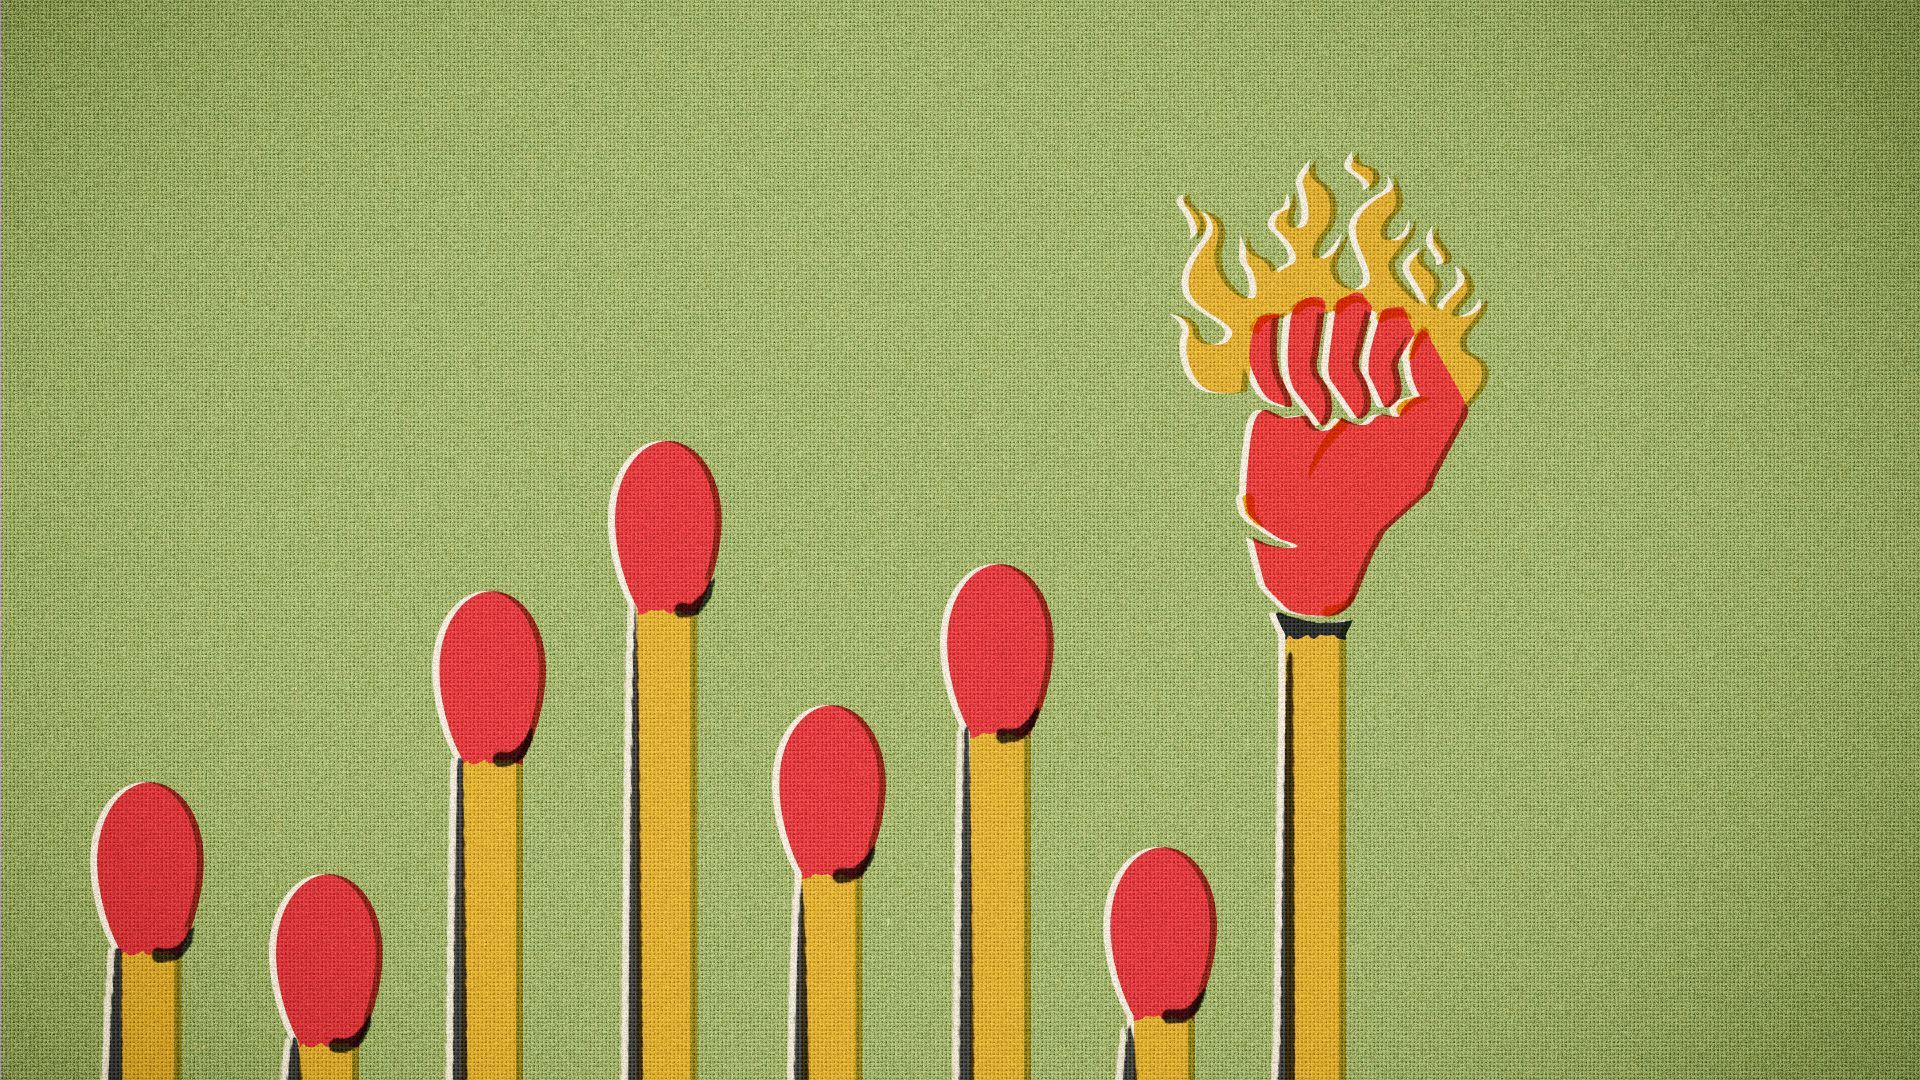 Illustration of a set of matches arranged a bar chart with the last match on fire in the shape of a fist. 